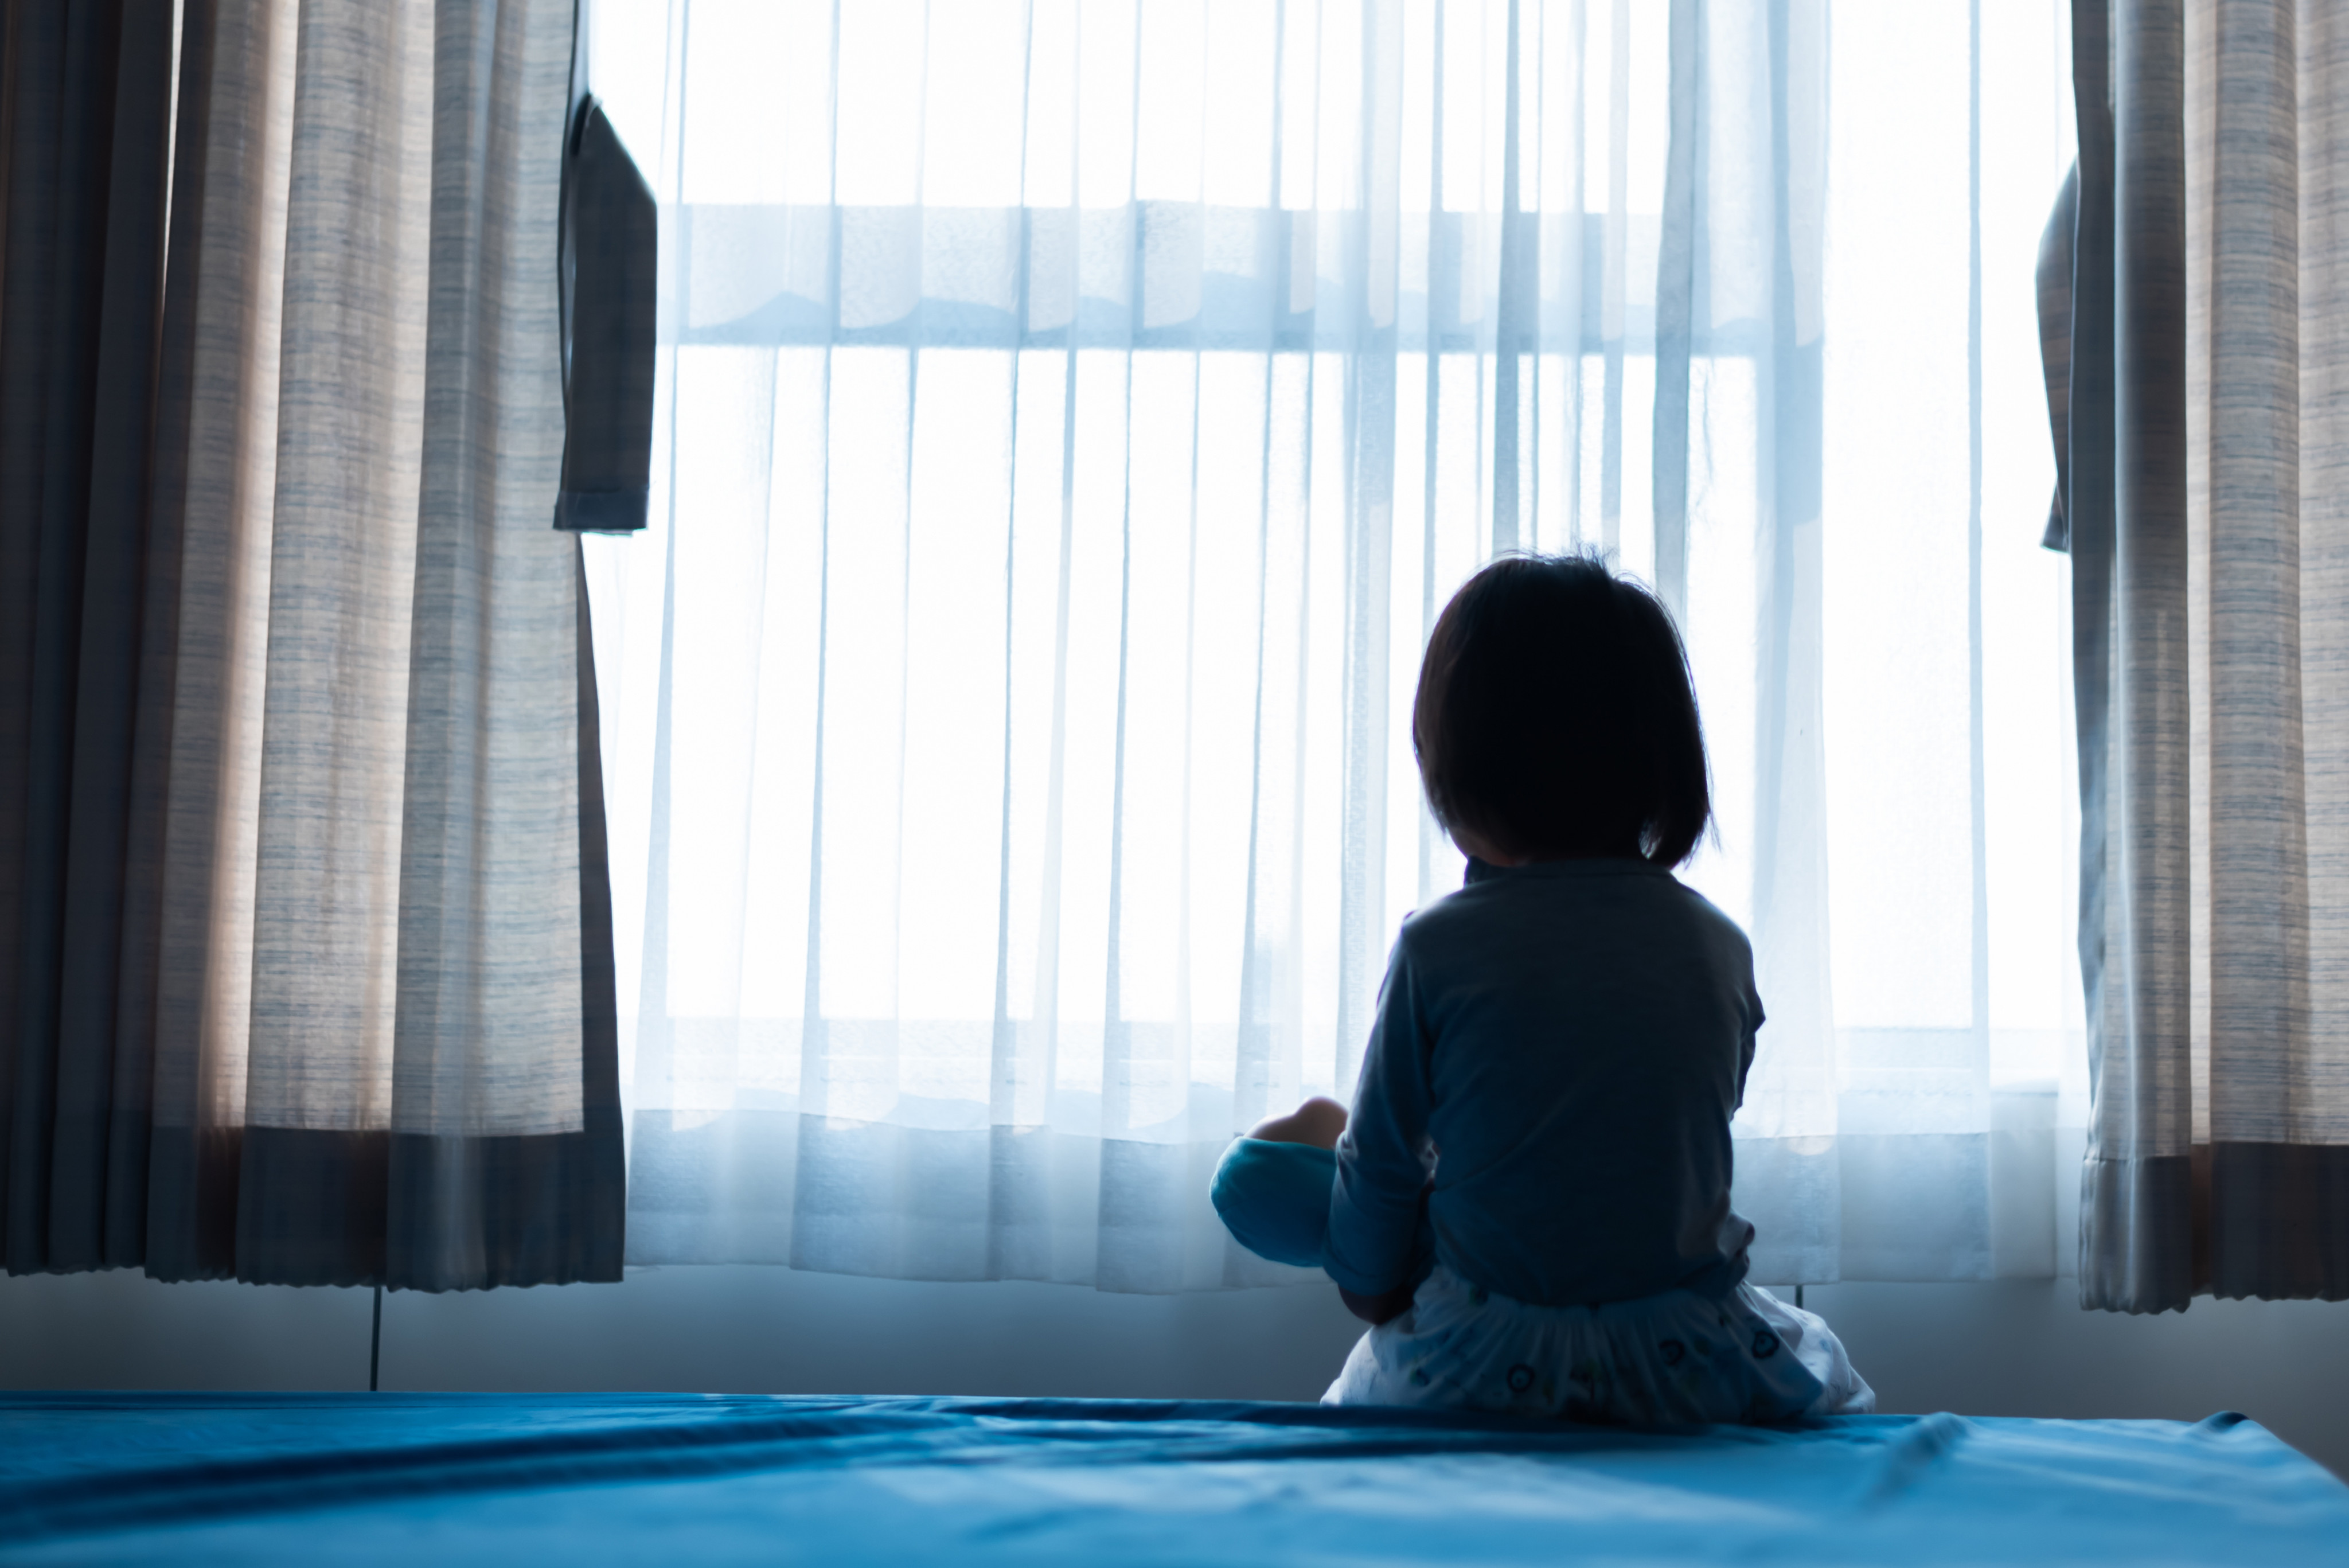 Under the bill, professionals who fail to report suspected child abuse could face a three-month prison term. Photo: Shutterstock